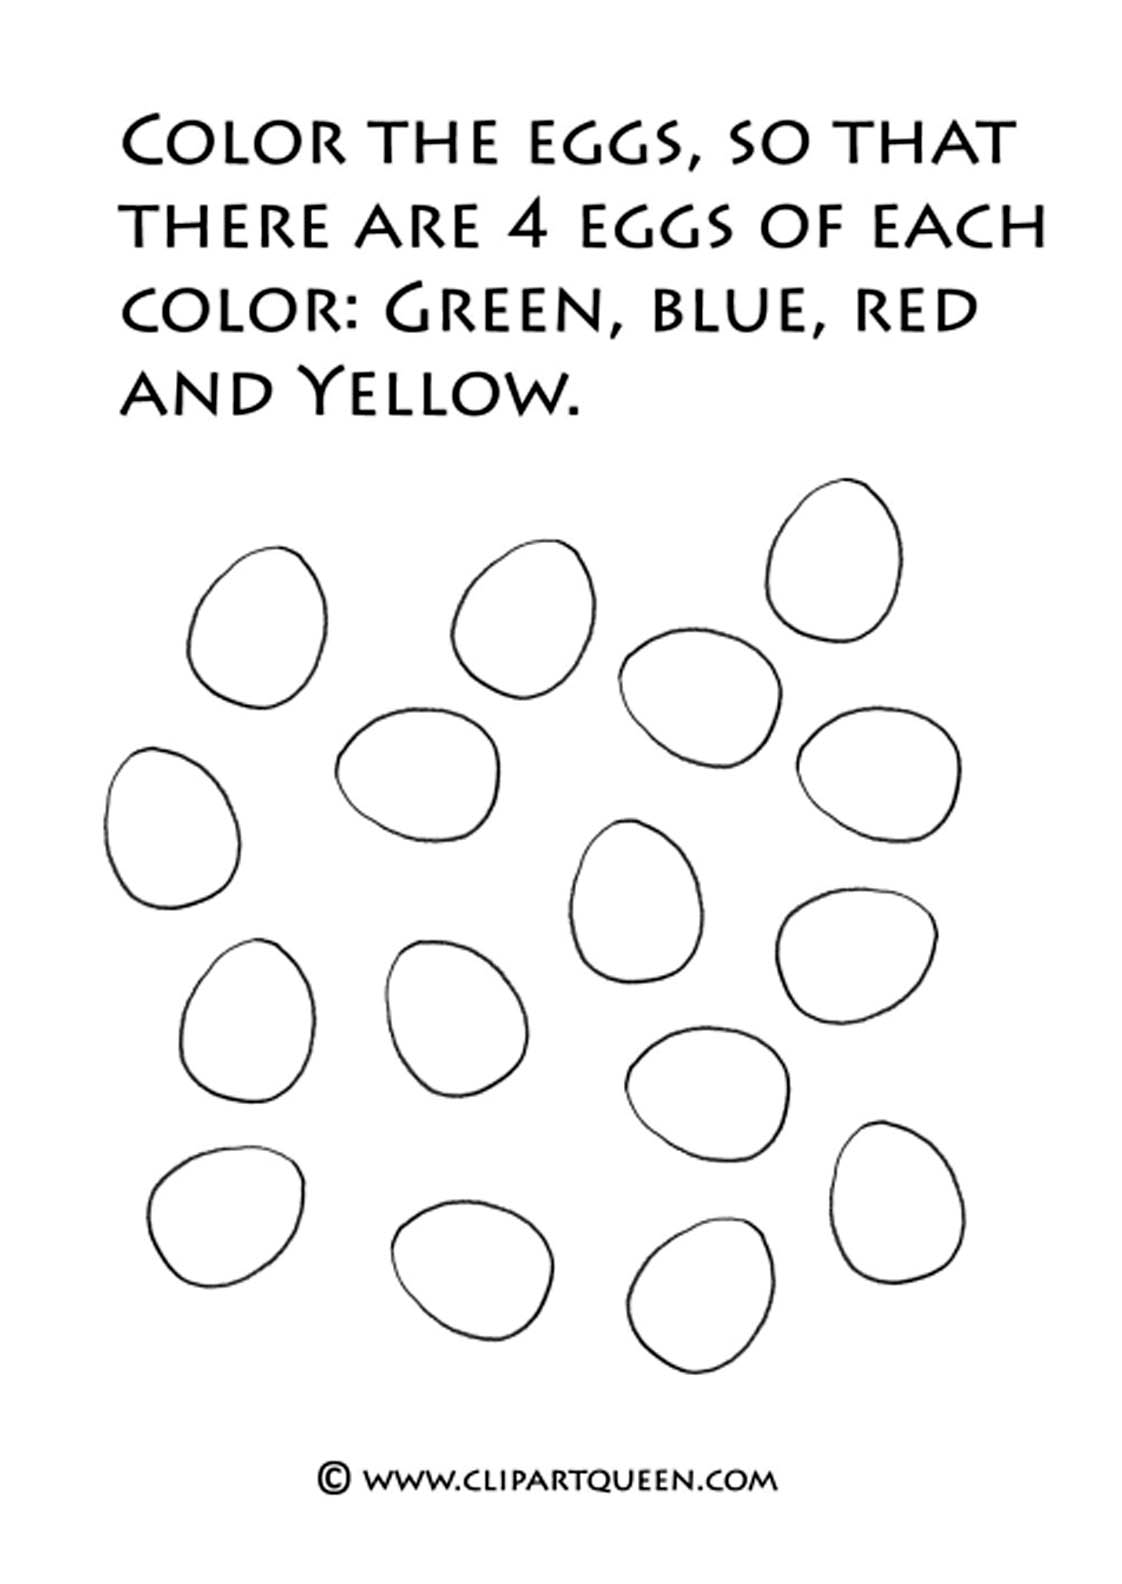 Easter coloring pages eggs in different colors